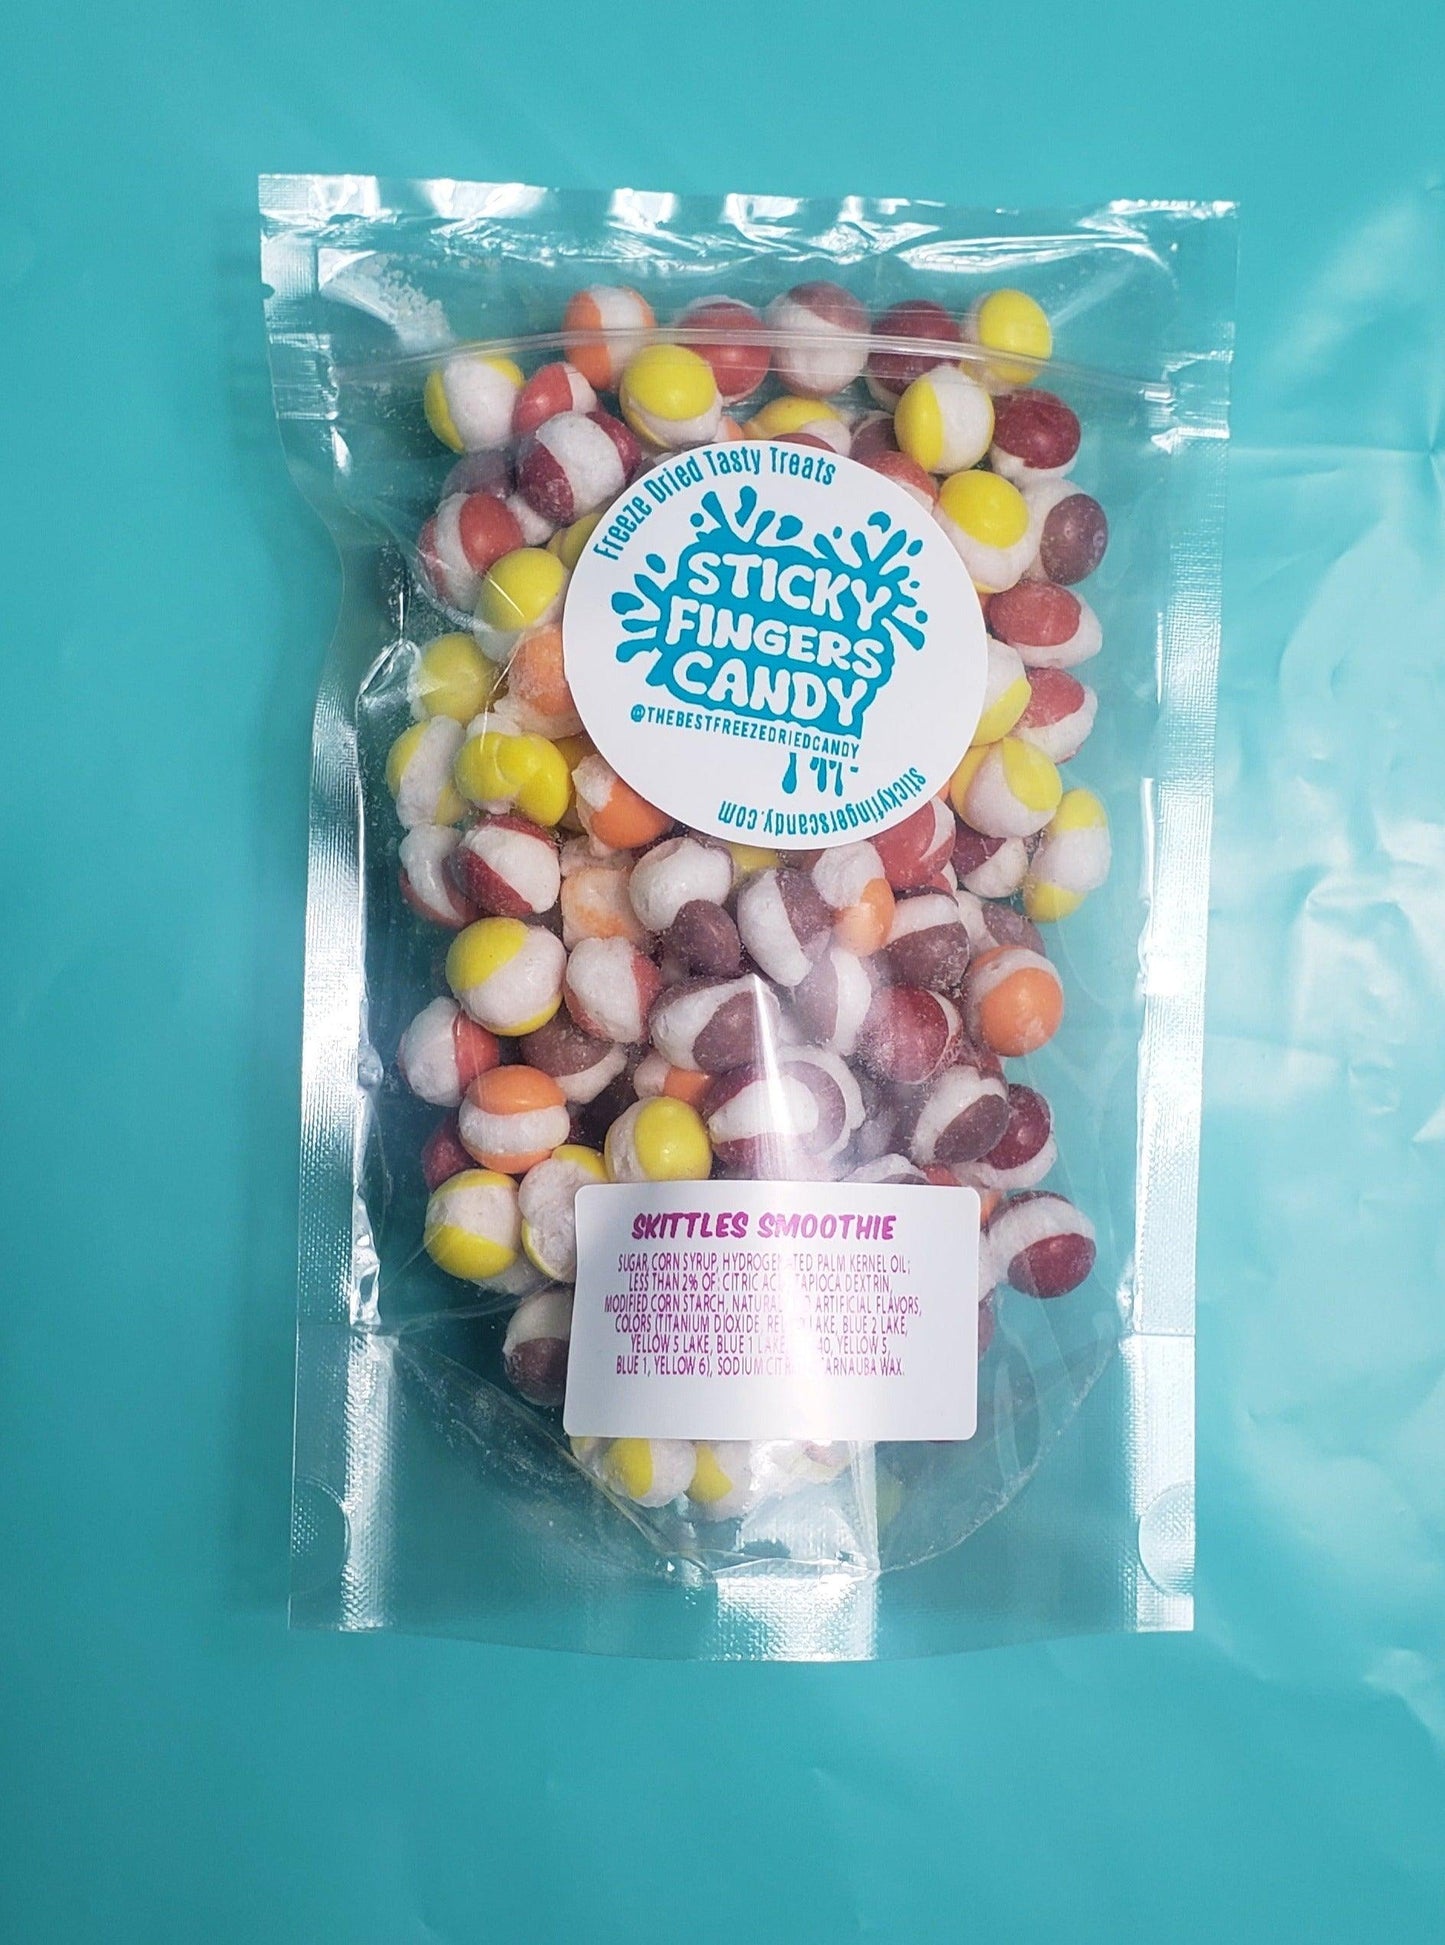 Case Smoothie Freeze Dried Skittles Candy - Sticky Fingers Candy - Freeze Dried Tasty Treats